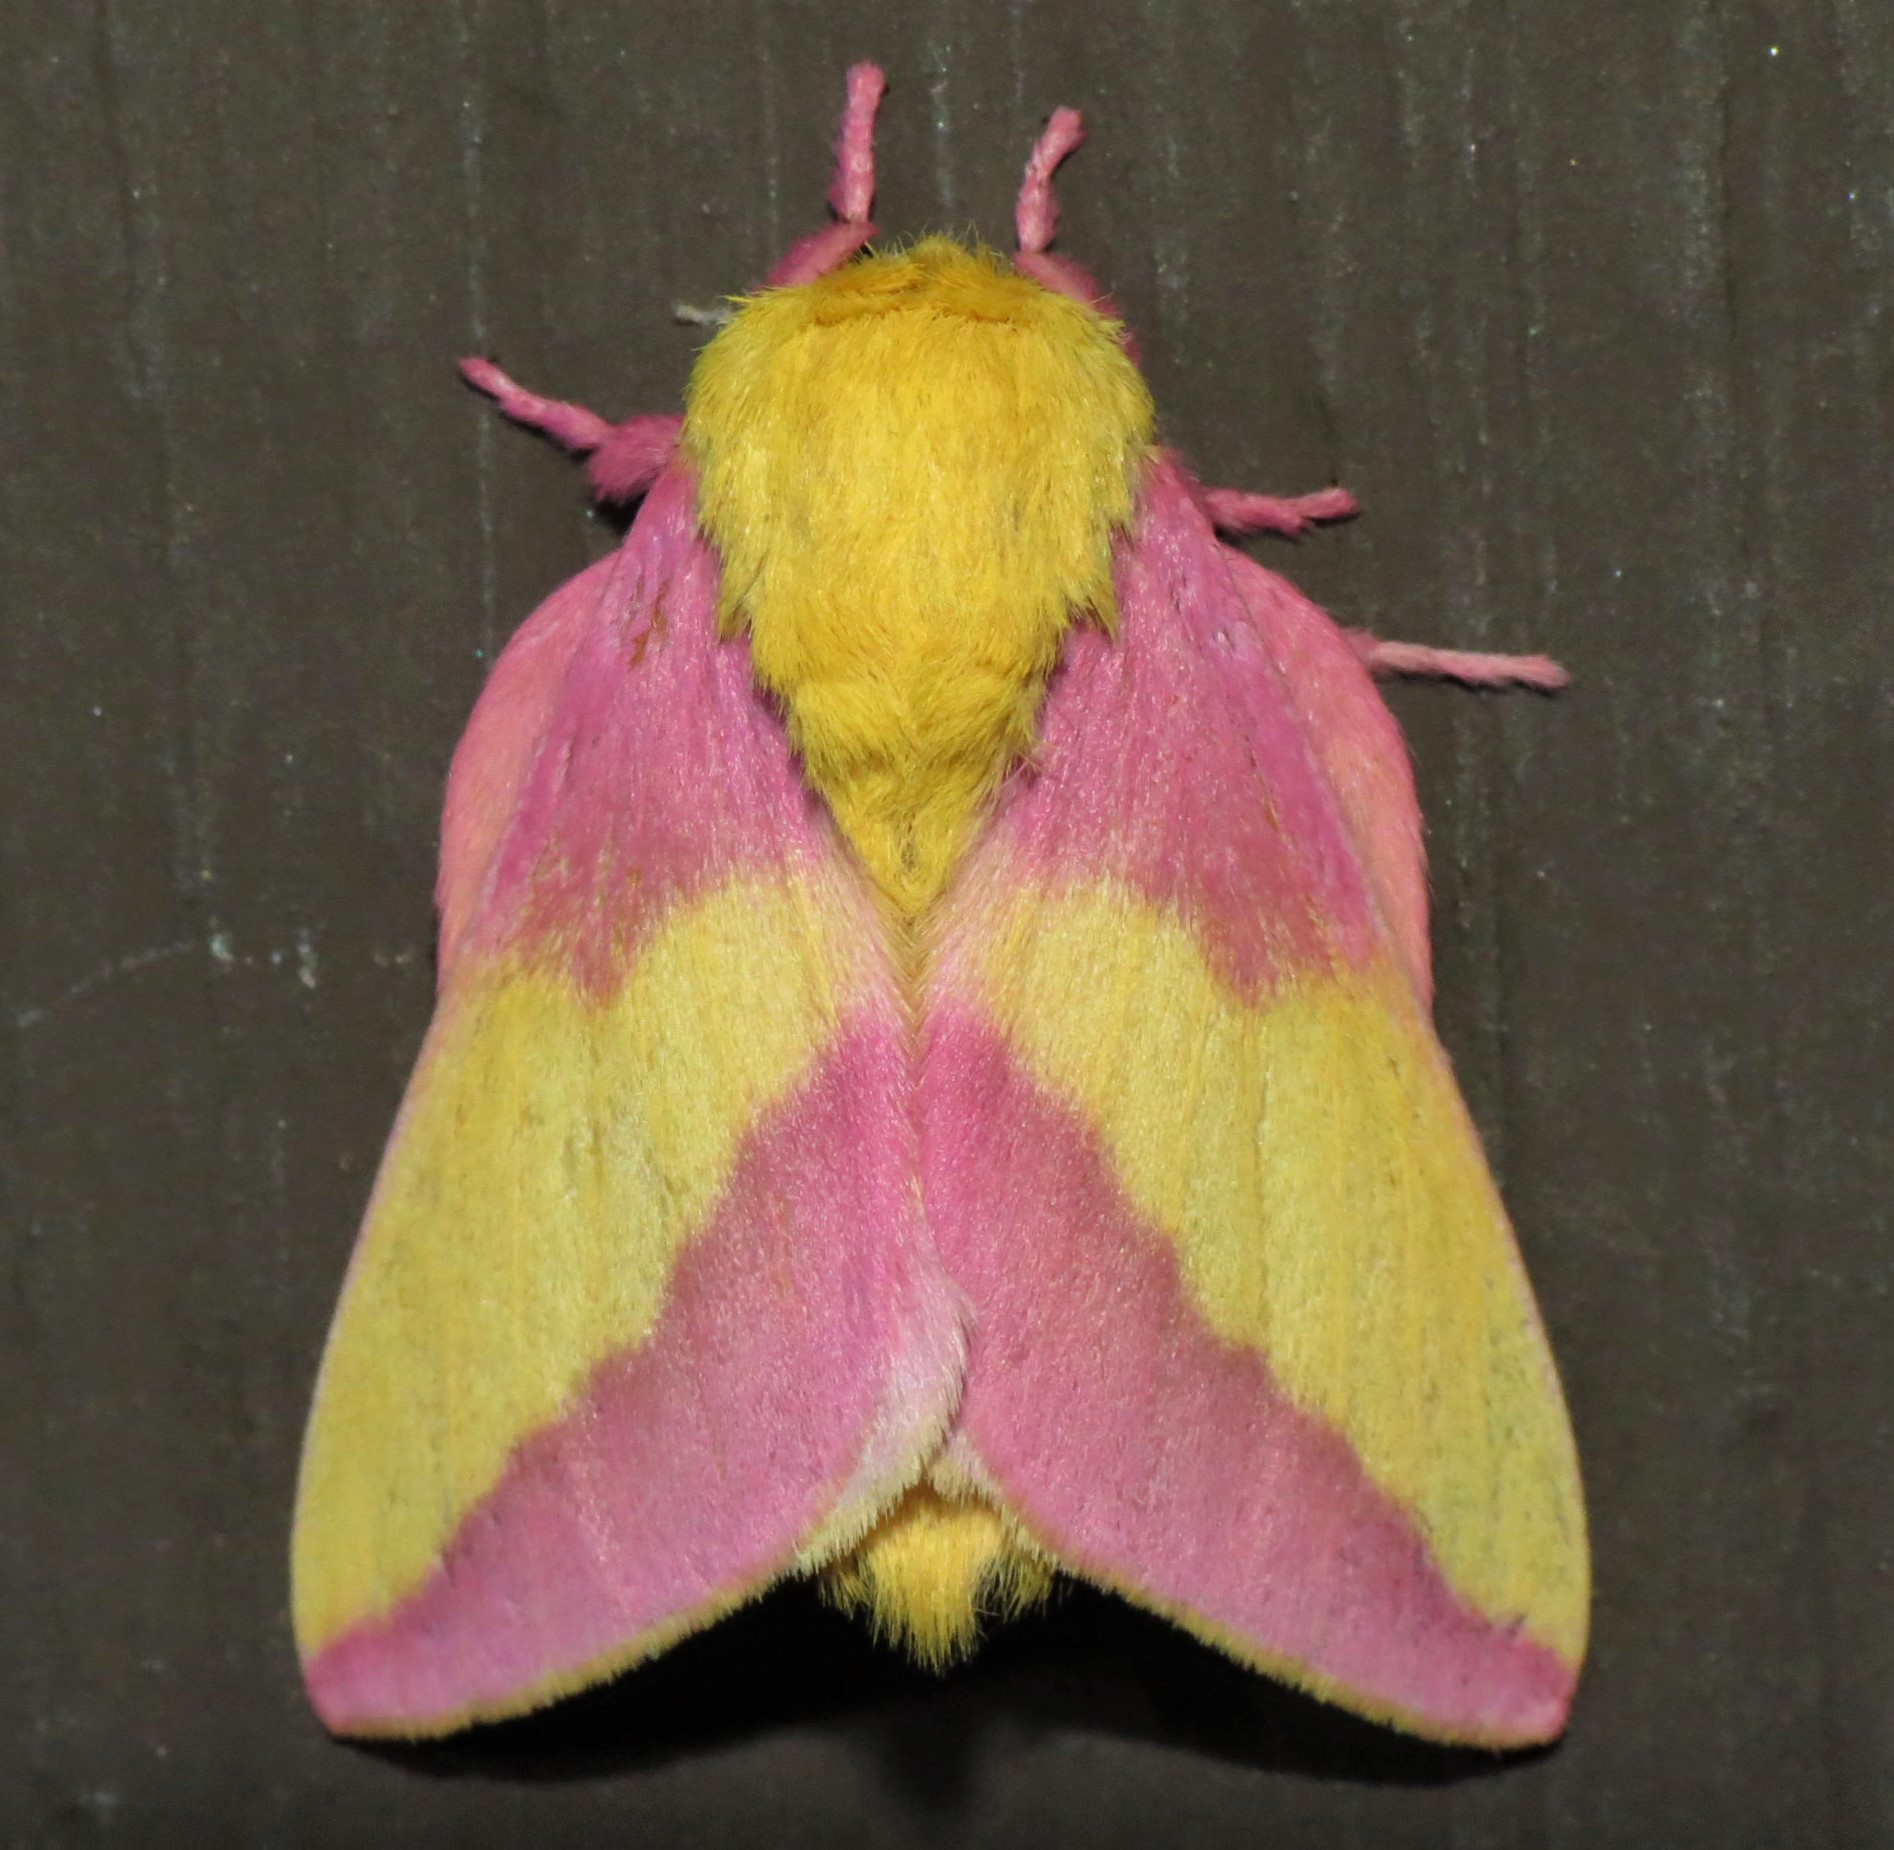 Rosy Maple Moth on Red Oak Seeds